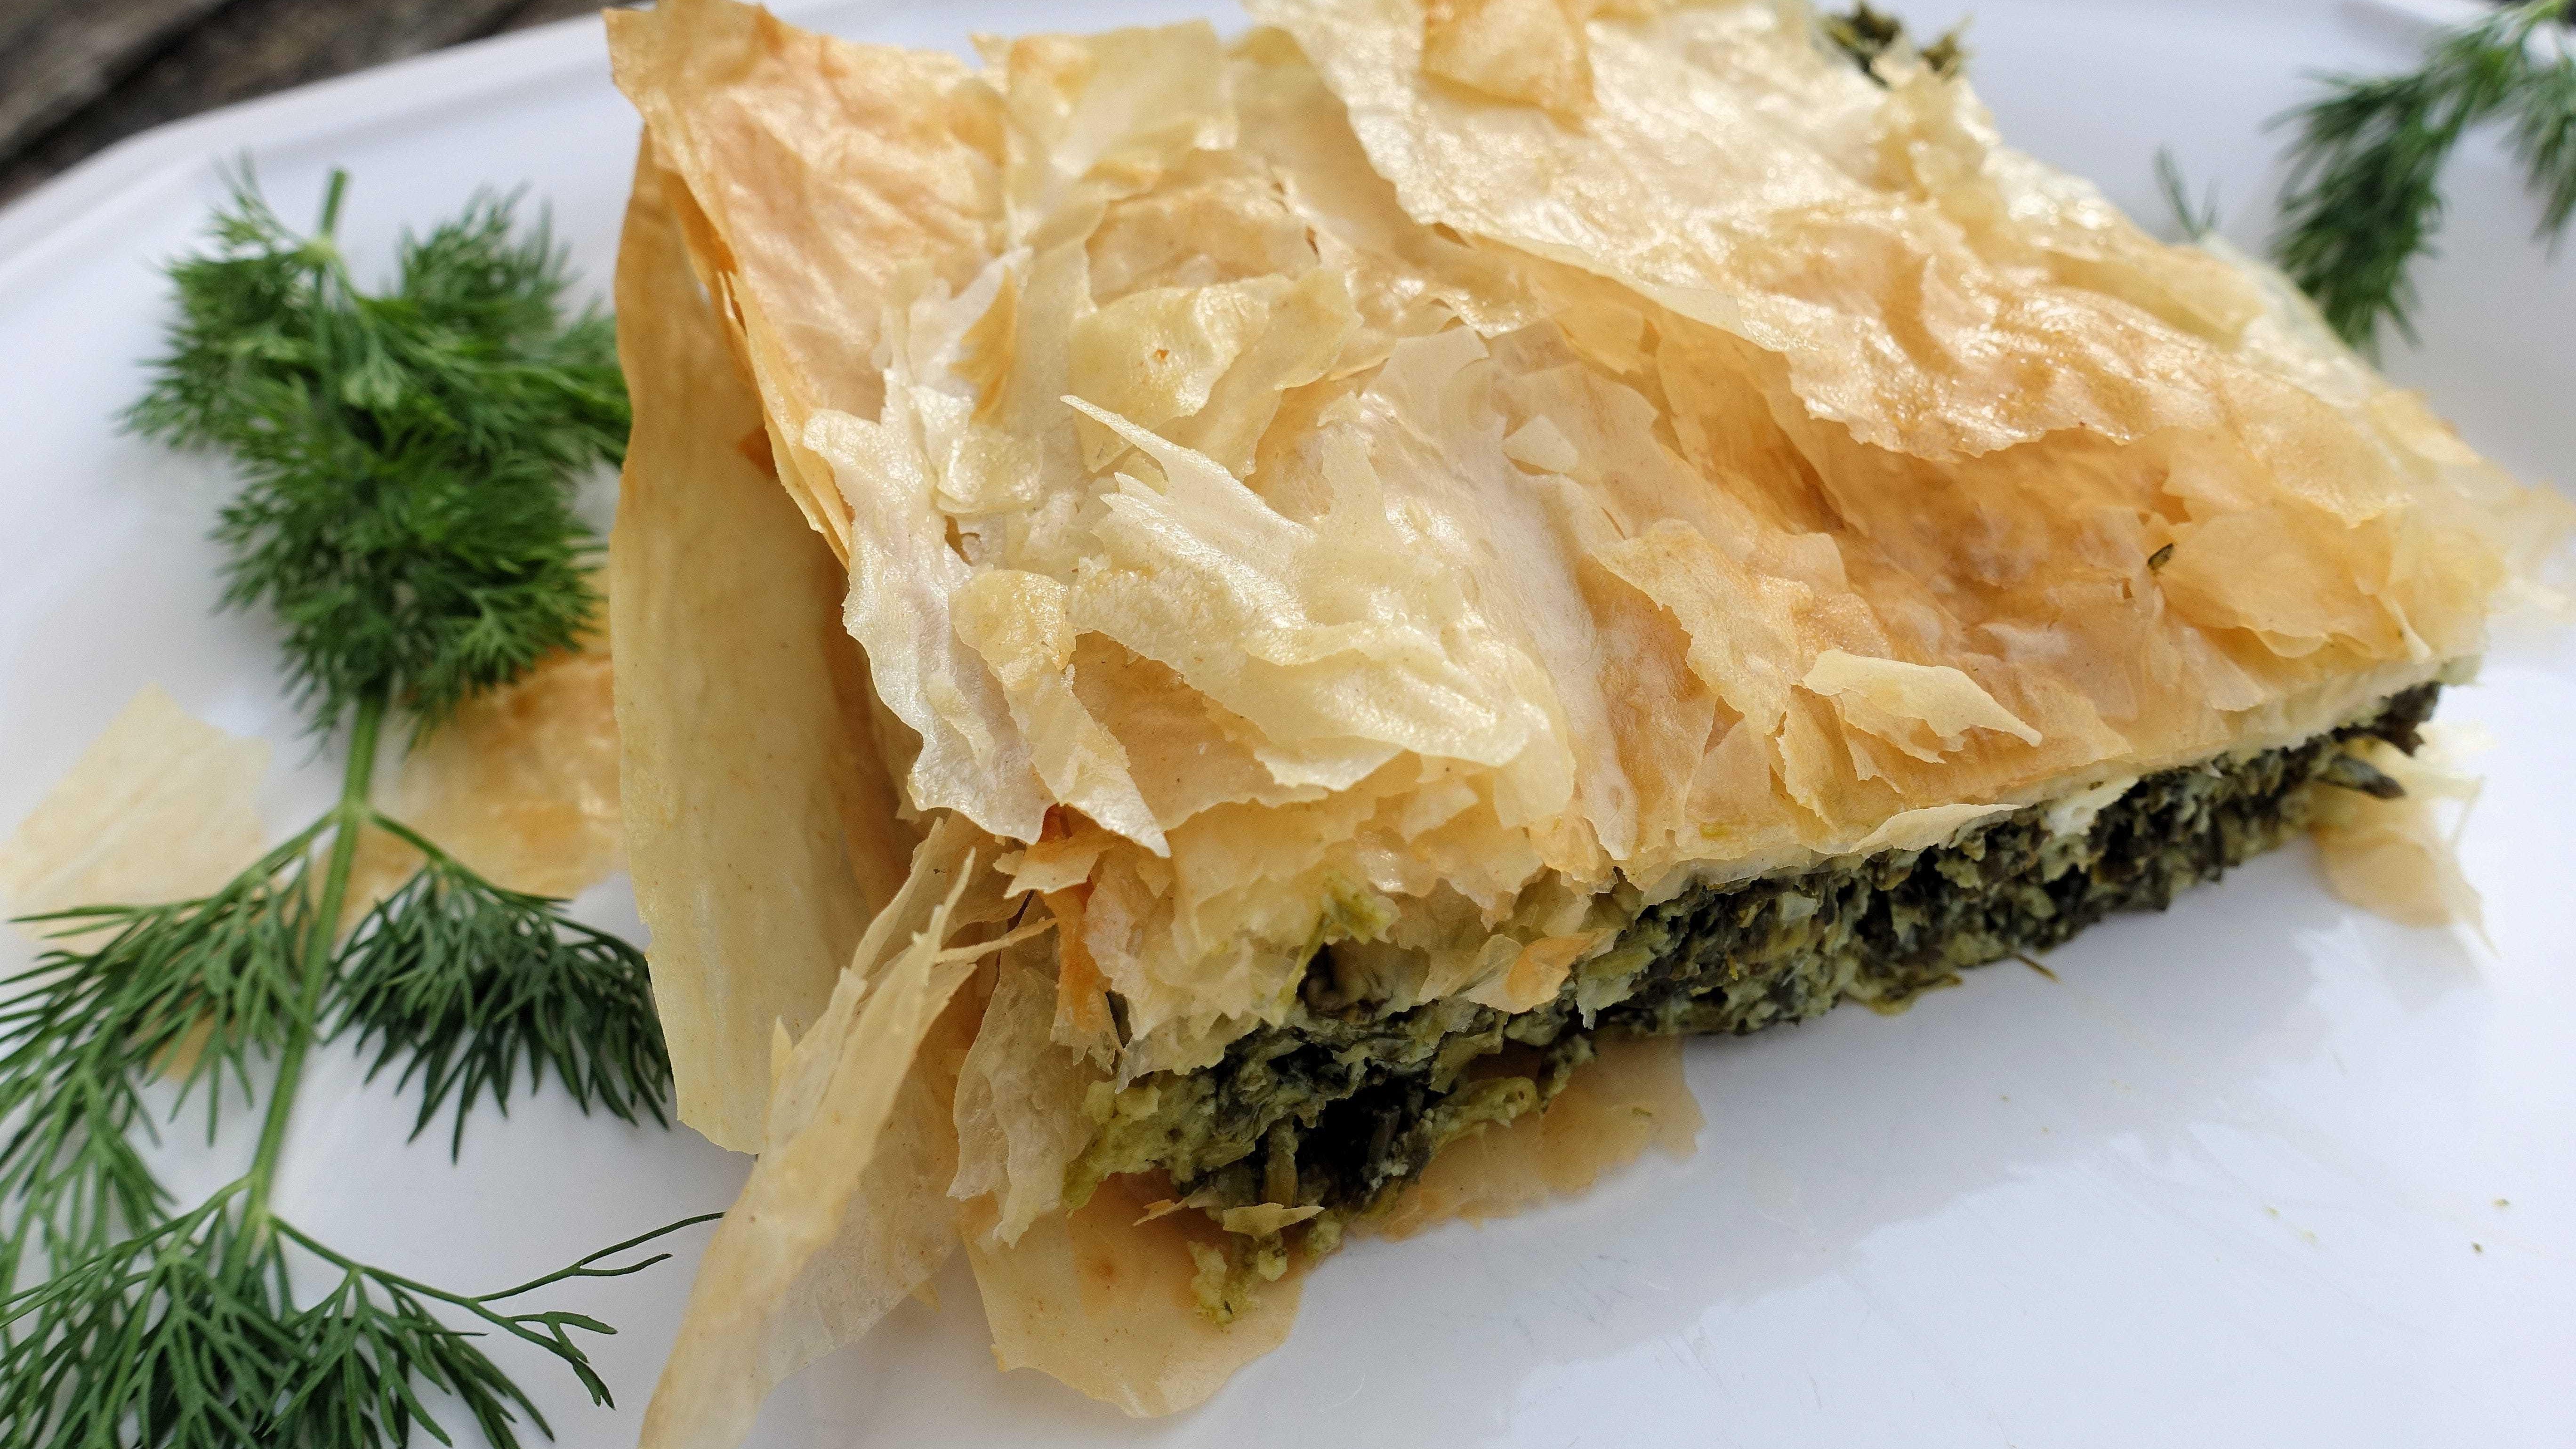 Spanakopita, or Greek spinach pie, is a savory dish made with herbs, feta and delicate phyllo dough.